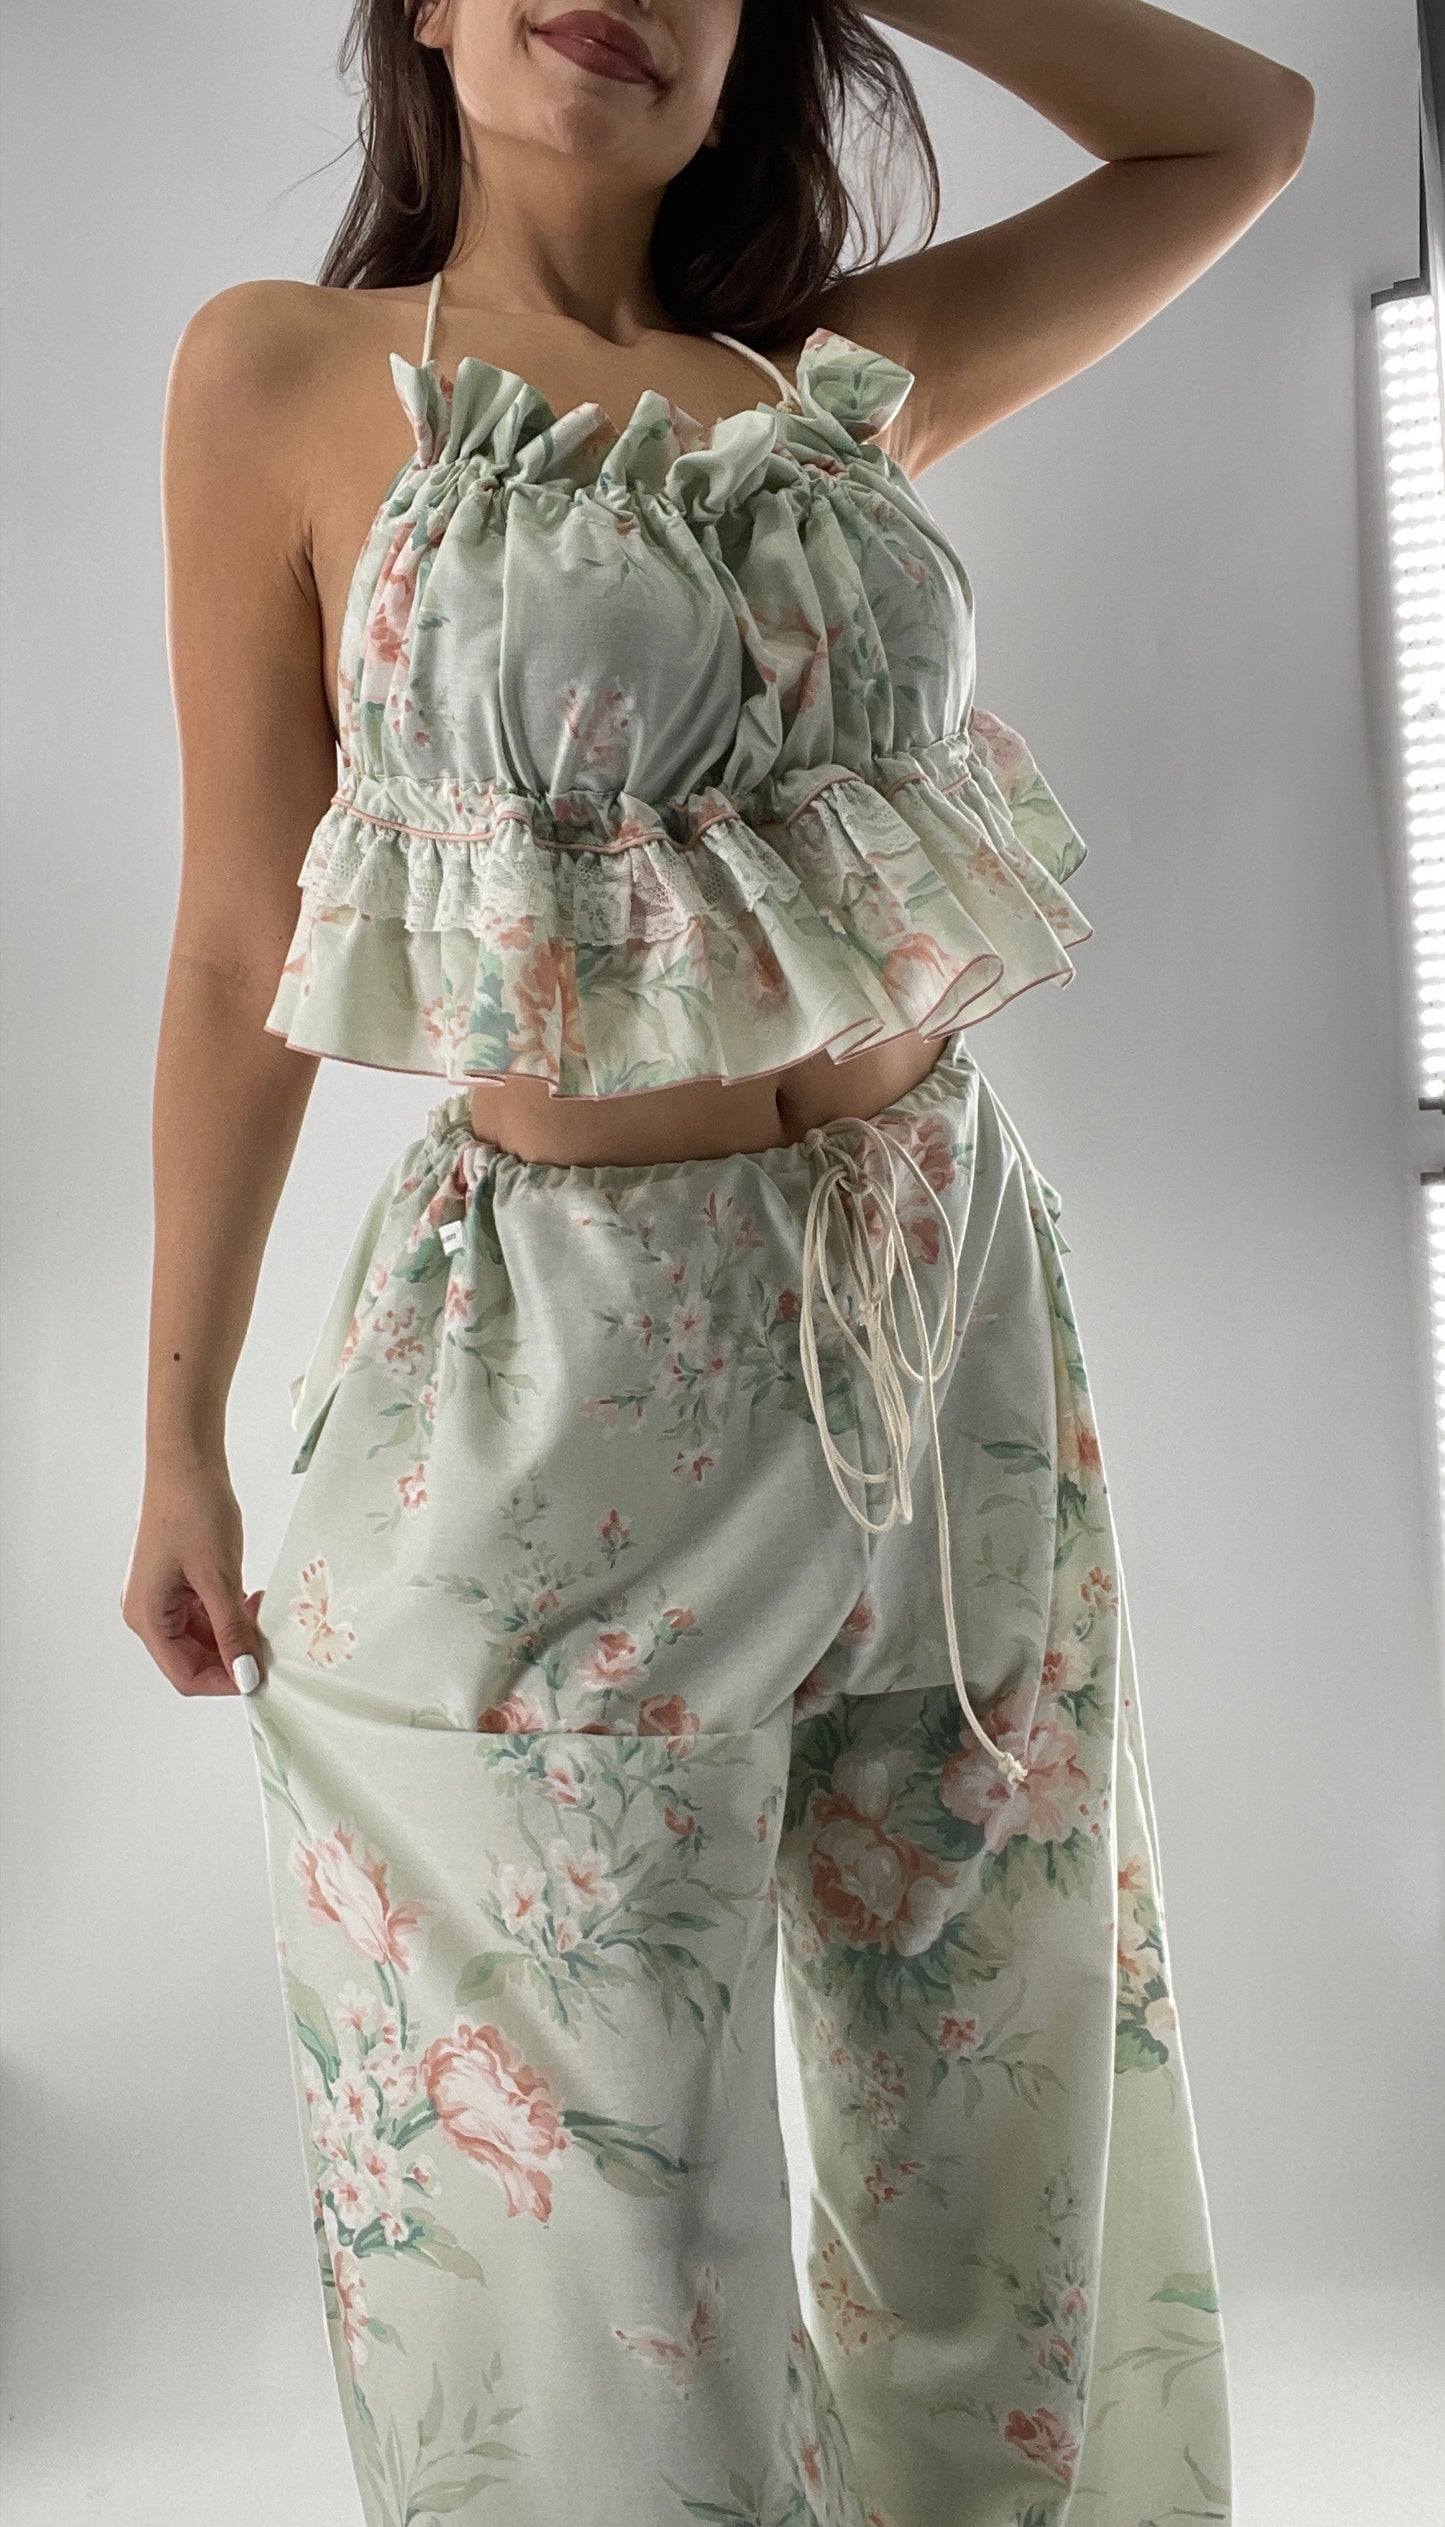 Vintage Set Covered in Delicate Dainty Florals, Butterflies, and Ruffles (One Size, Adjustable)